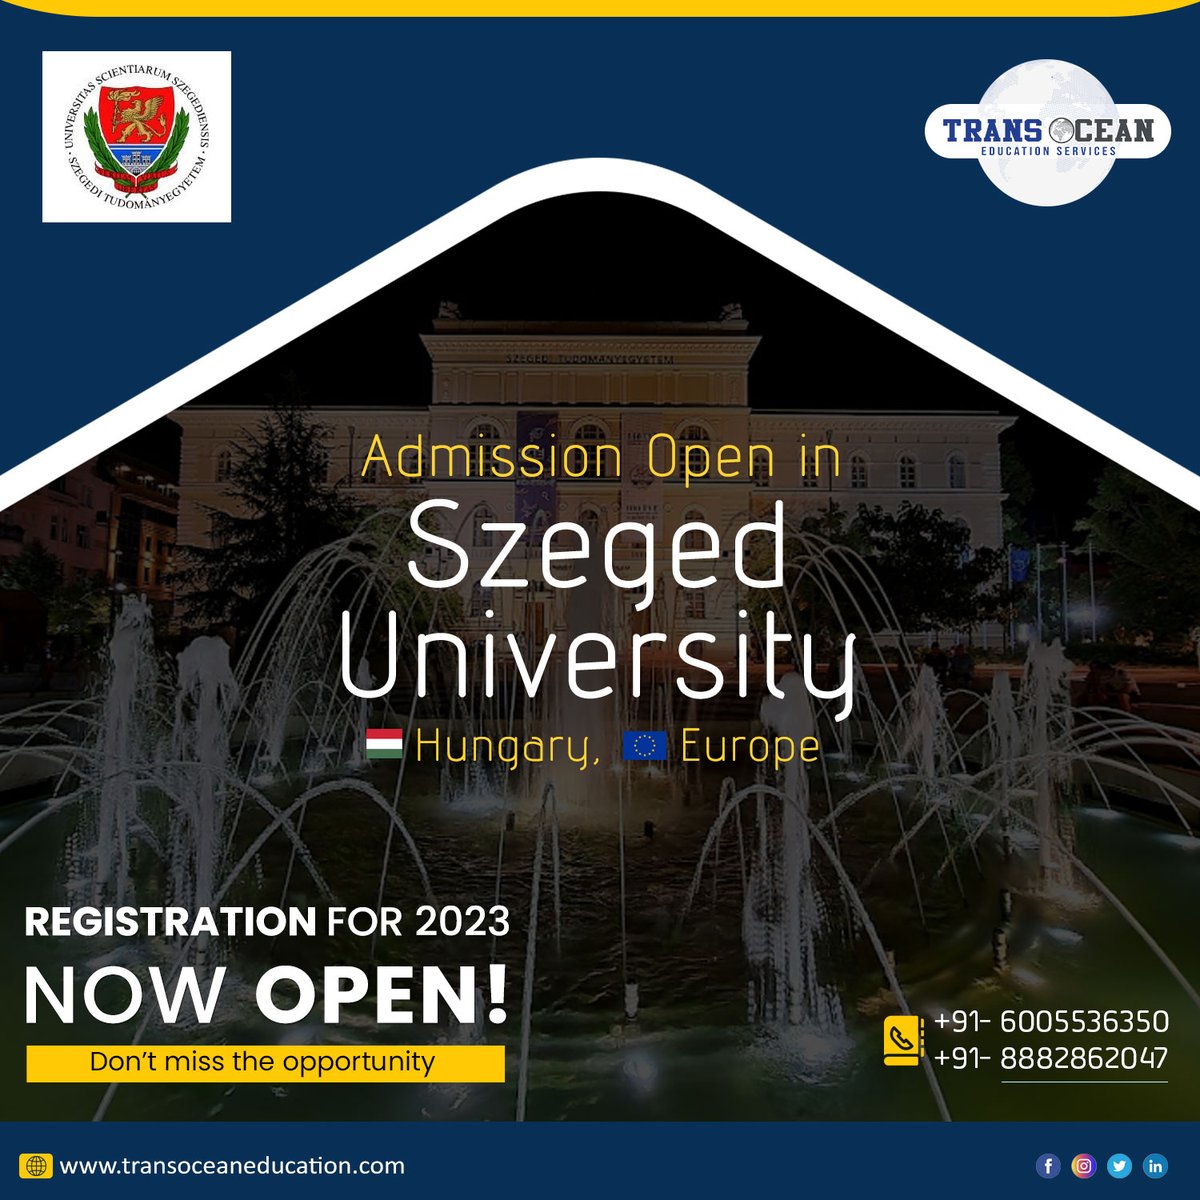 Registrations are open for 2023 at @Uni_Szeged in Hungary Europe for #medicalstudy. #SzegedUniversity is a great choice for students looking to expand their knowledge of Medical Field. admission in #MBBScollege #TransoceanEducation transoceaneducation.com +916005536350 or